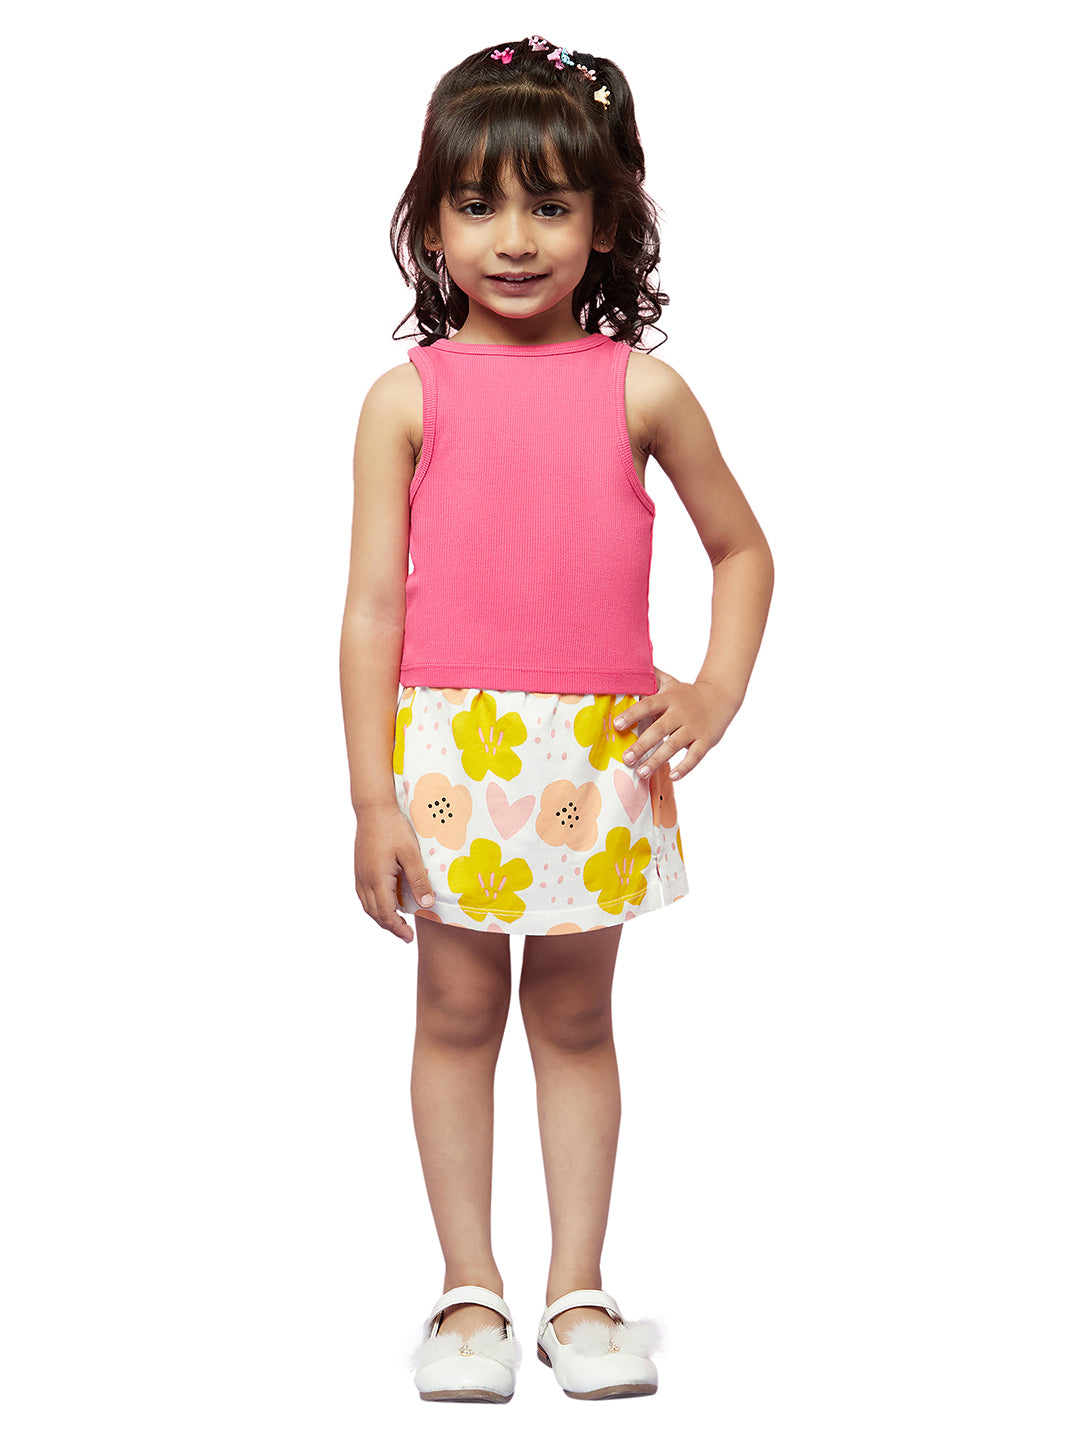 Kid Girls' Pink Ribbed Top and White Flower Printed Skirt